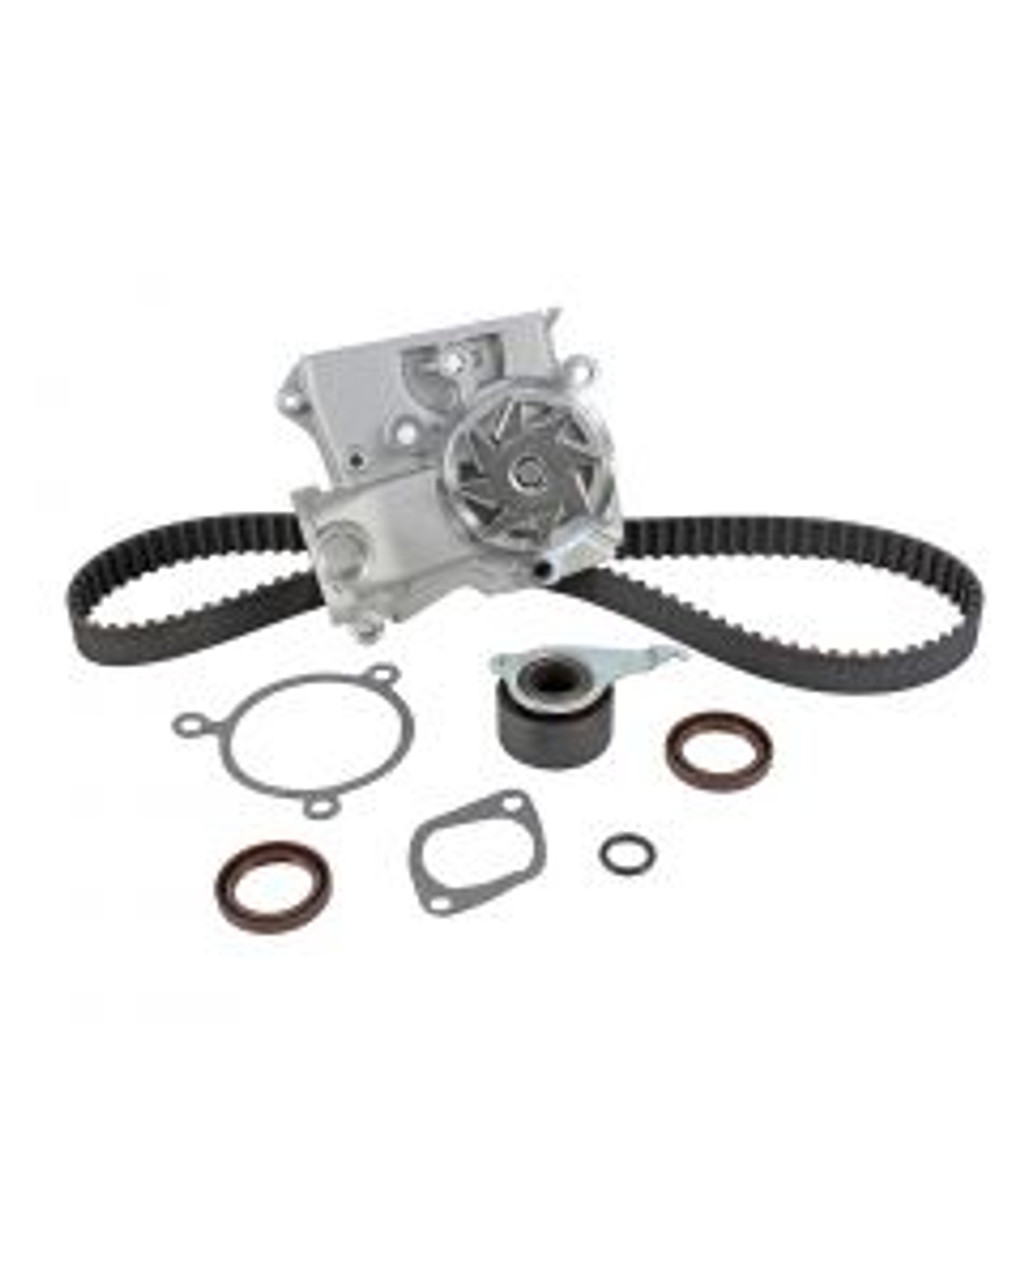 Timing Belt Kit with Water Pump 2.0L 1987 Mazda 626 - TBK406WP.2